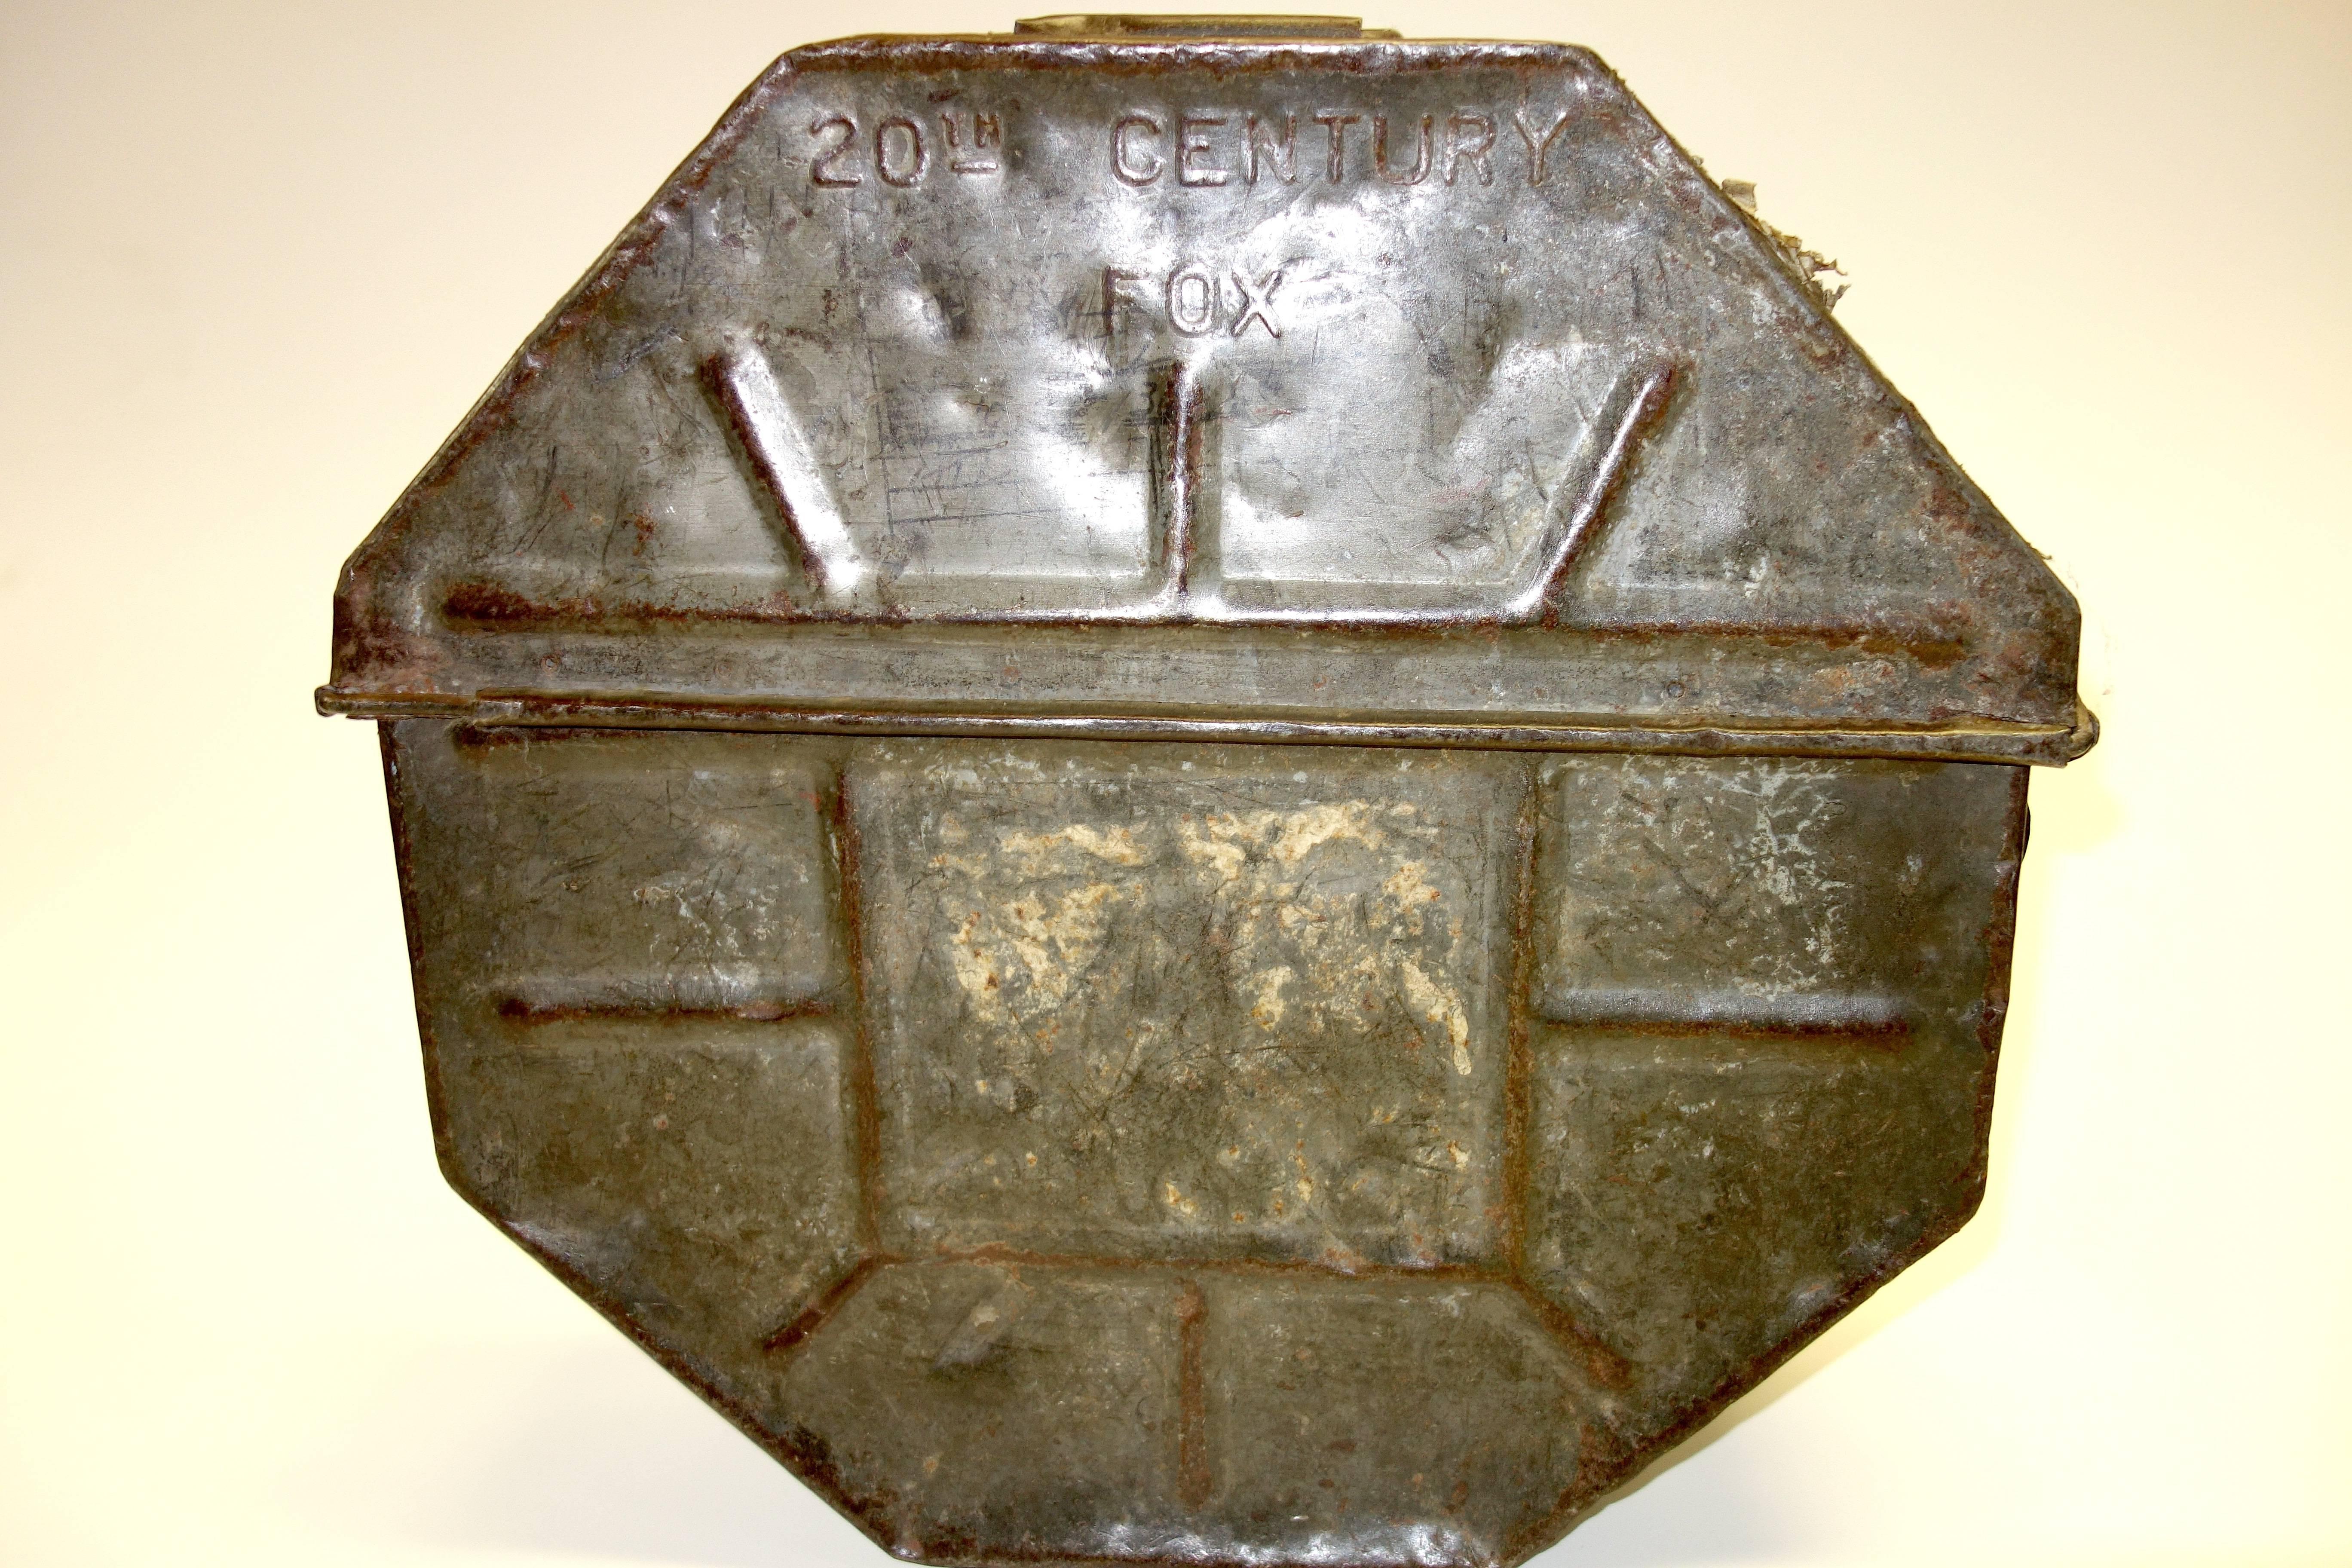 Embossed 20th Century Fox Studios Movie Shipping Container, Circa 1940, Show As Sculpture